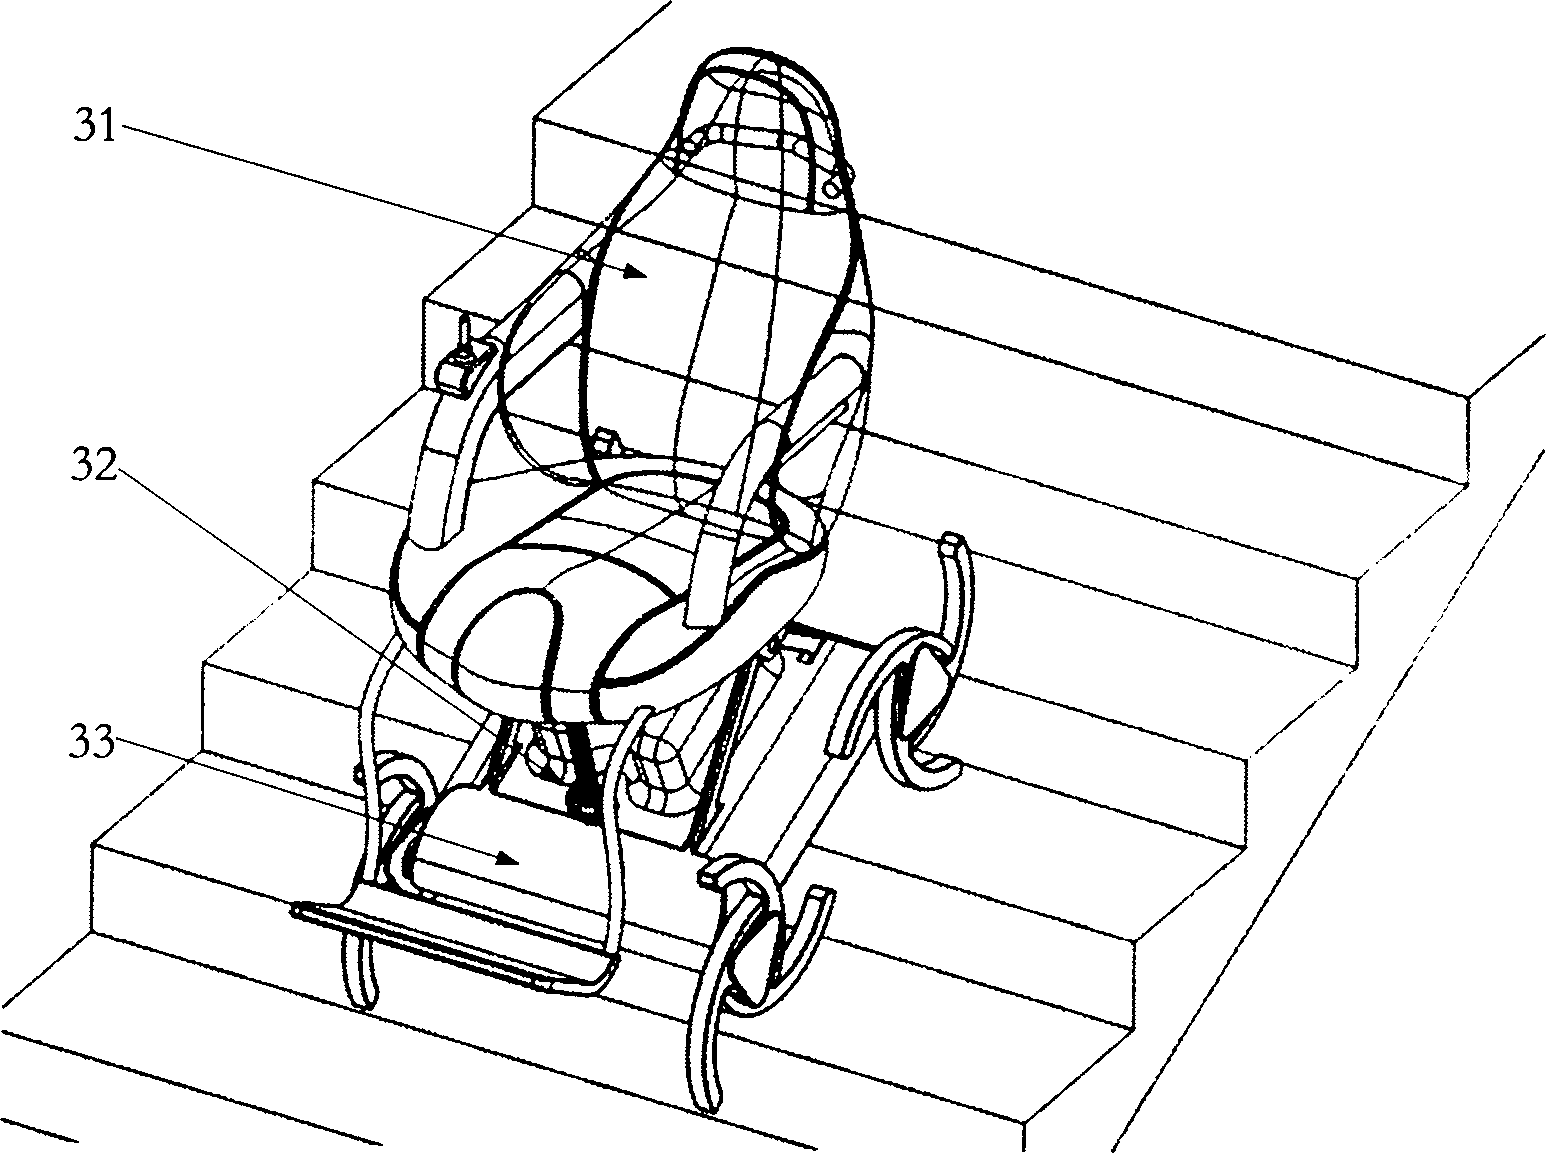 Wheelchair capable of climbing stairs